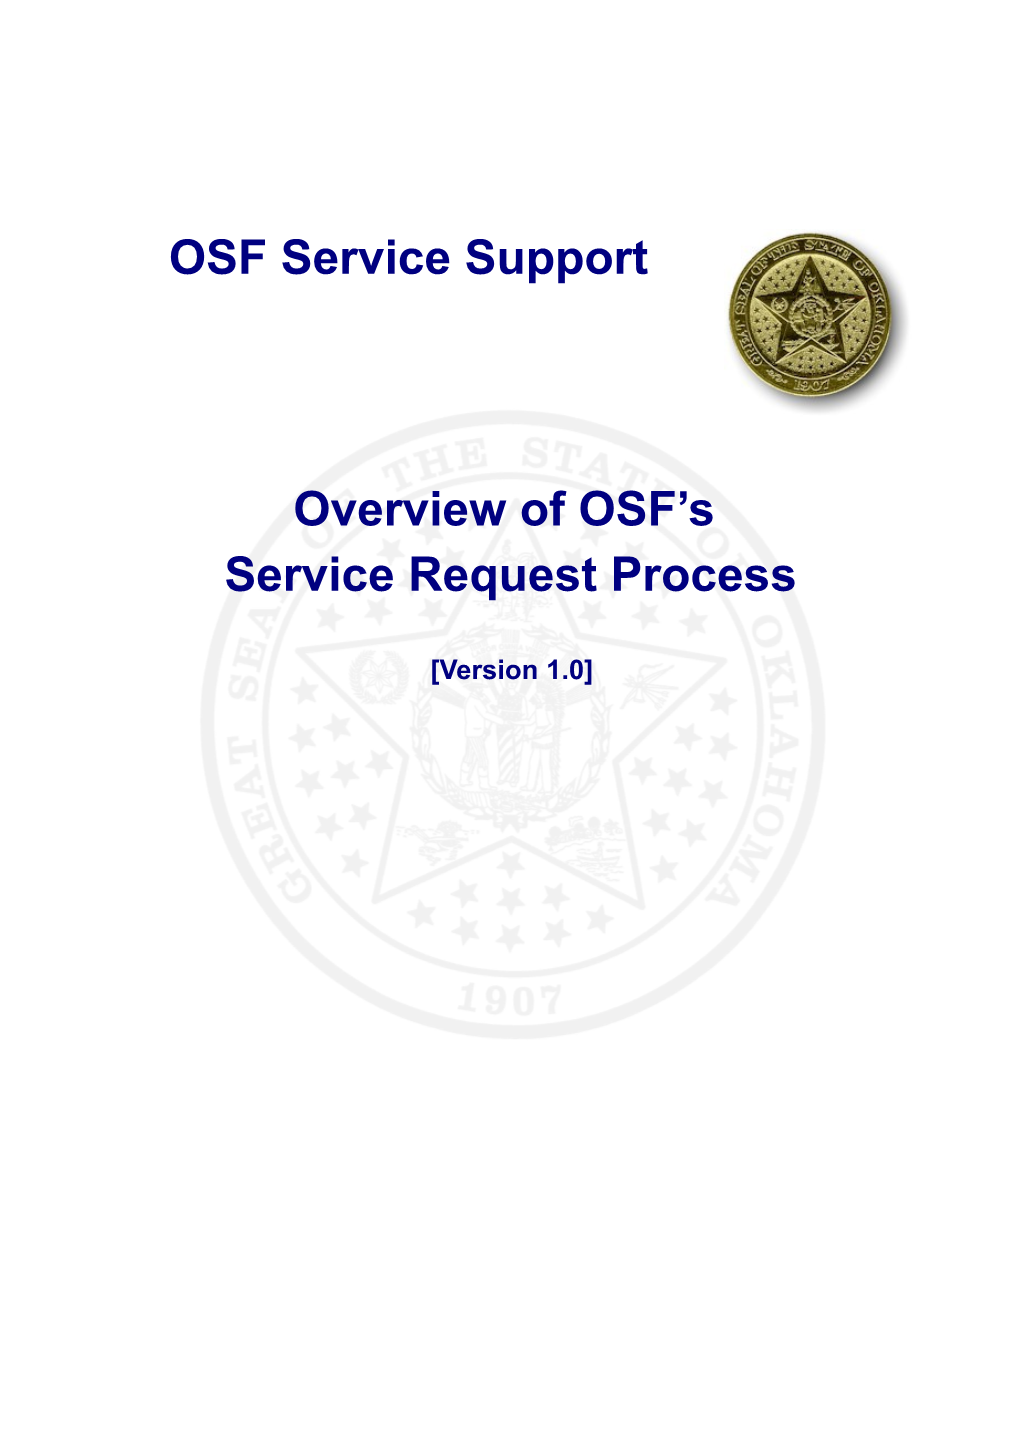 Service Request Process Overview